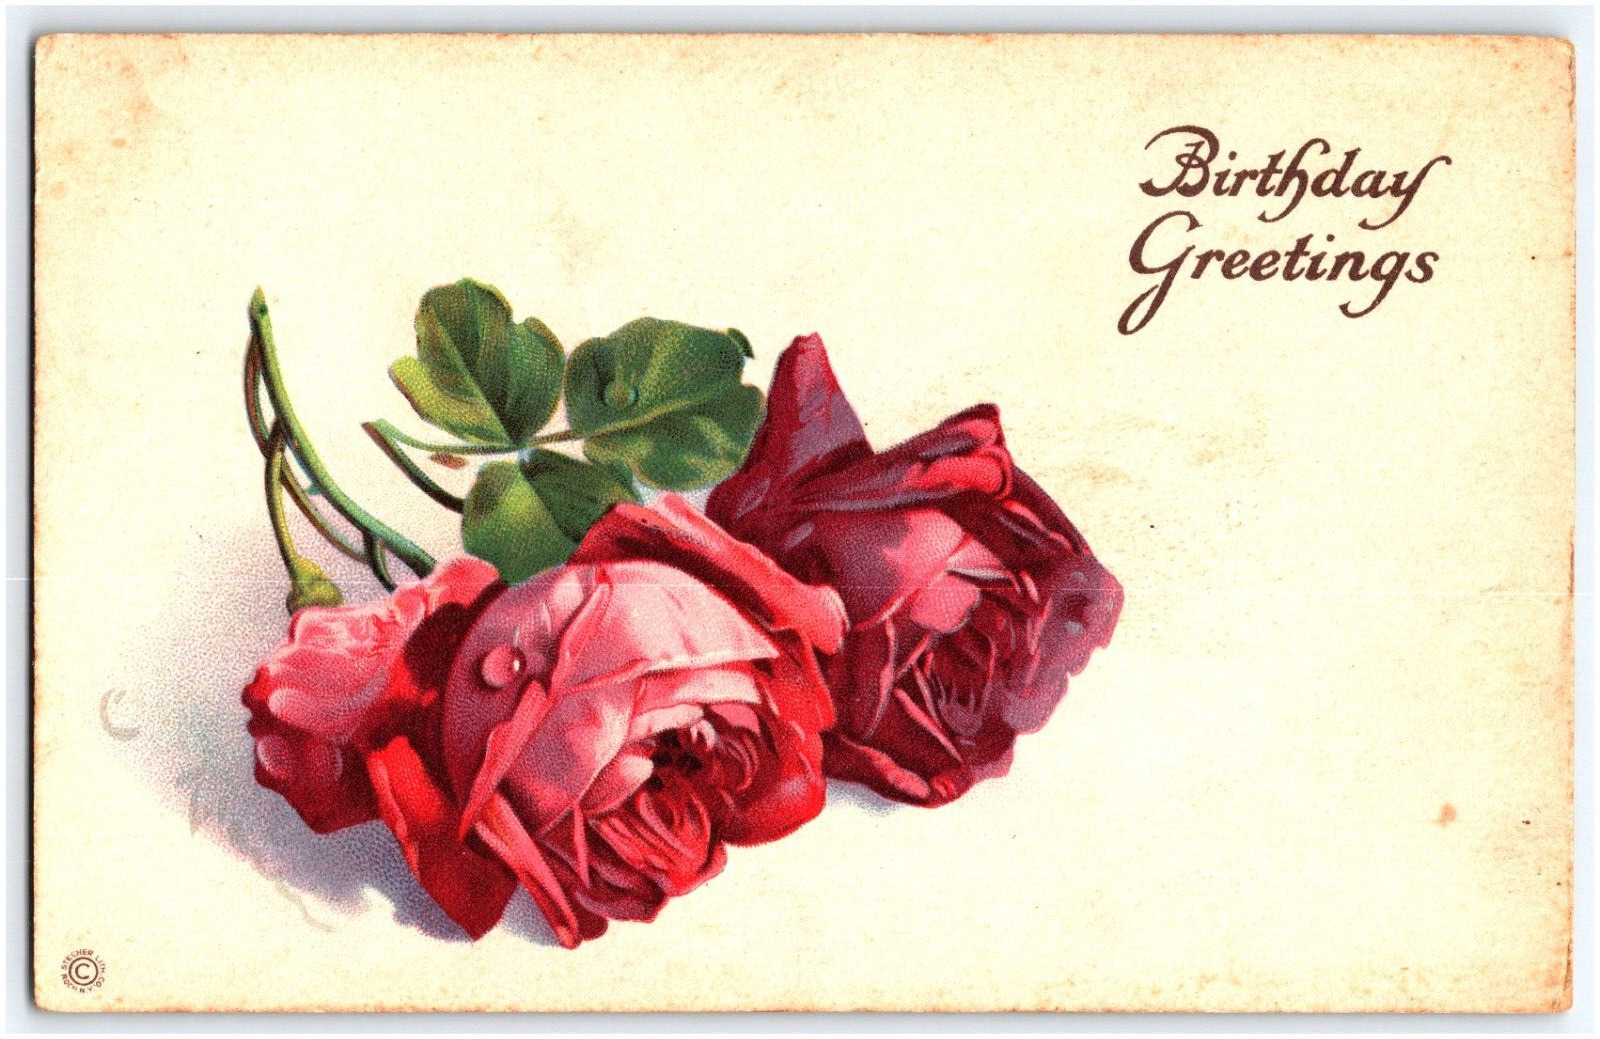 BEAUTIFUL ROSES BIRTHDAY GREETINGS ARTIST SIGNED UNKNOWN  1900s POSTCARD